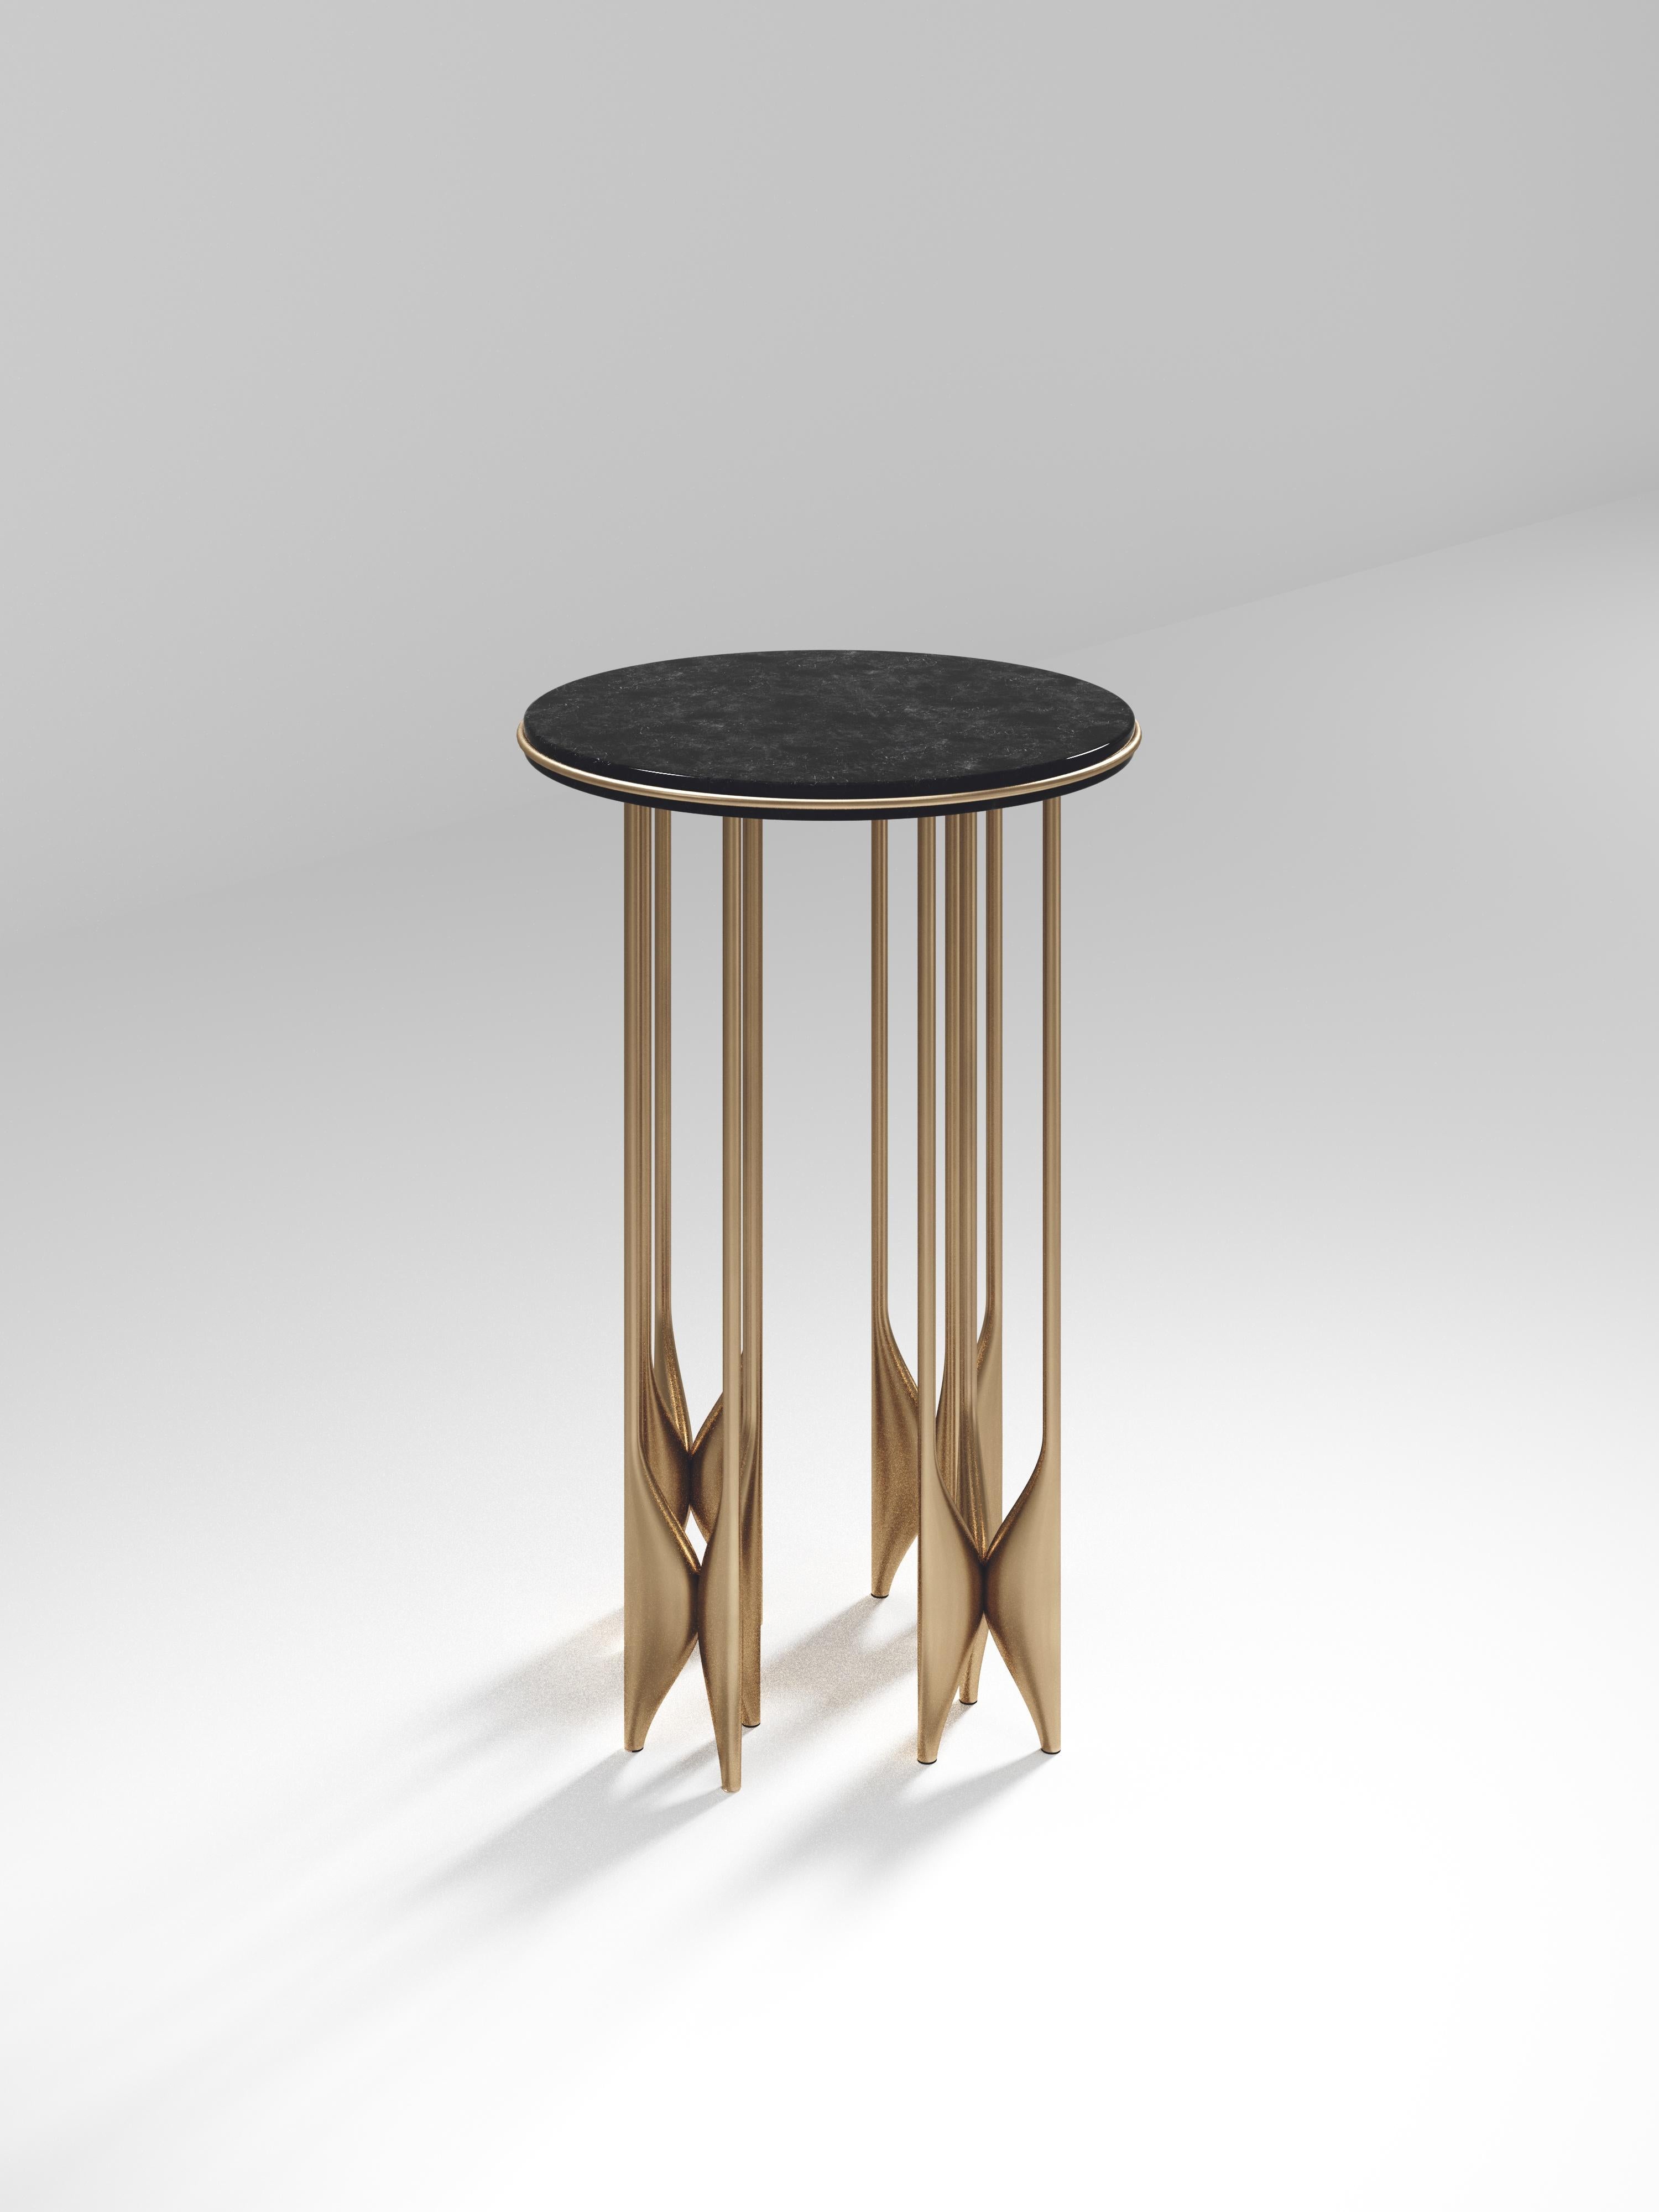 The Plumeria side table by Kifu Paris is a dramatic and sculptural piece. The black pen shell inlaid top sits on clusters of bronze-patina brass legs that are conceptually inspired by bird feathers floating on top of a lake. The border of the top is